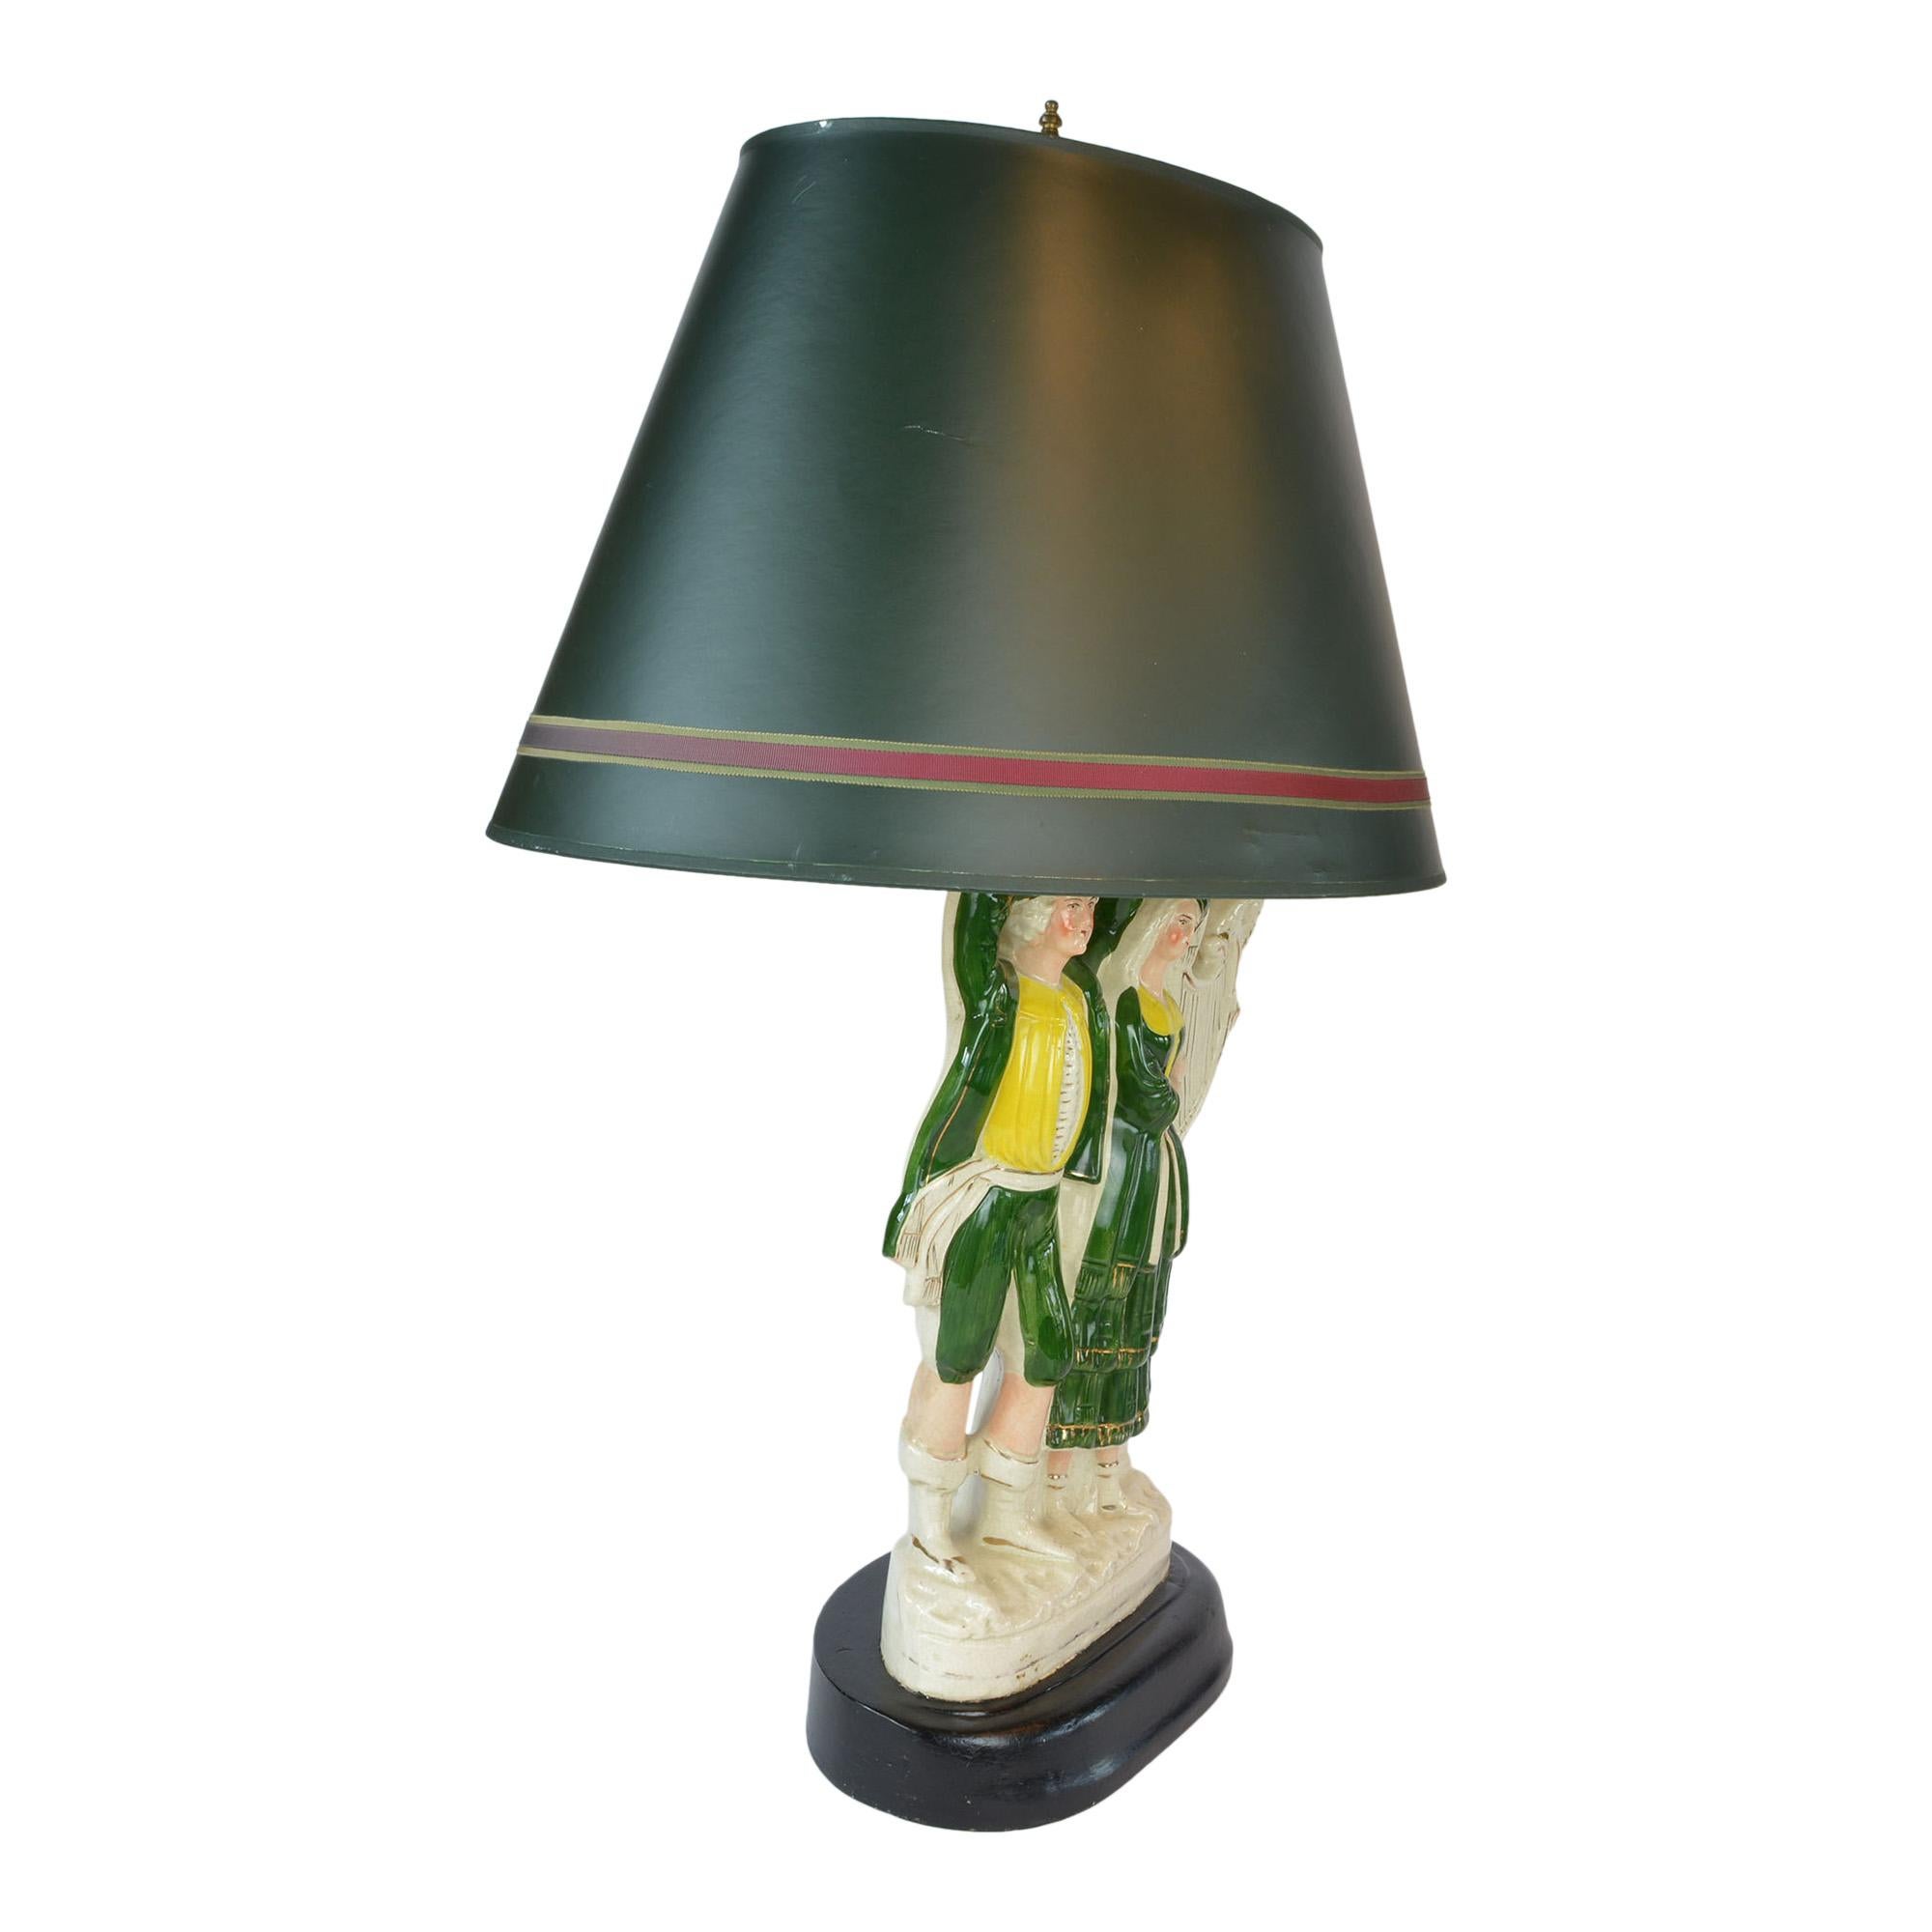 Large Antique Staffordshire figural has been converted into a lamp with an oval hard frame shade. The couple stands proud and united on the lamp each wearing green, yellow and white traditional attire. She is playing a harp accented in gold.